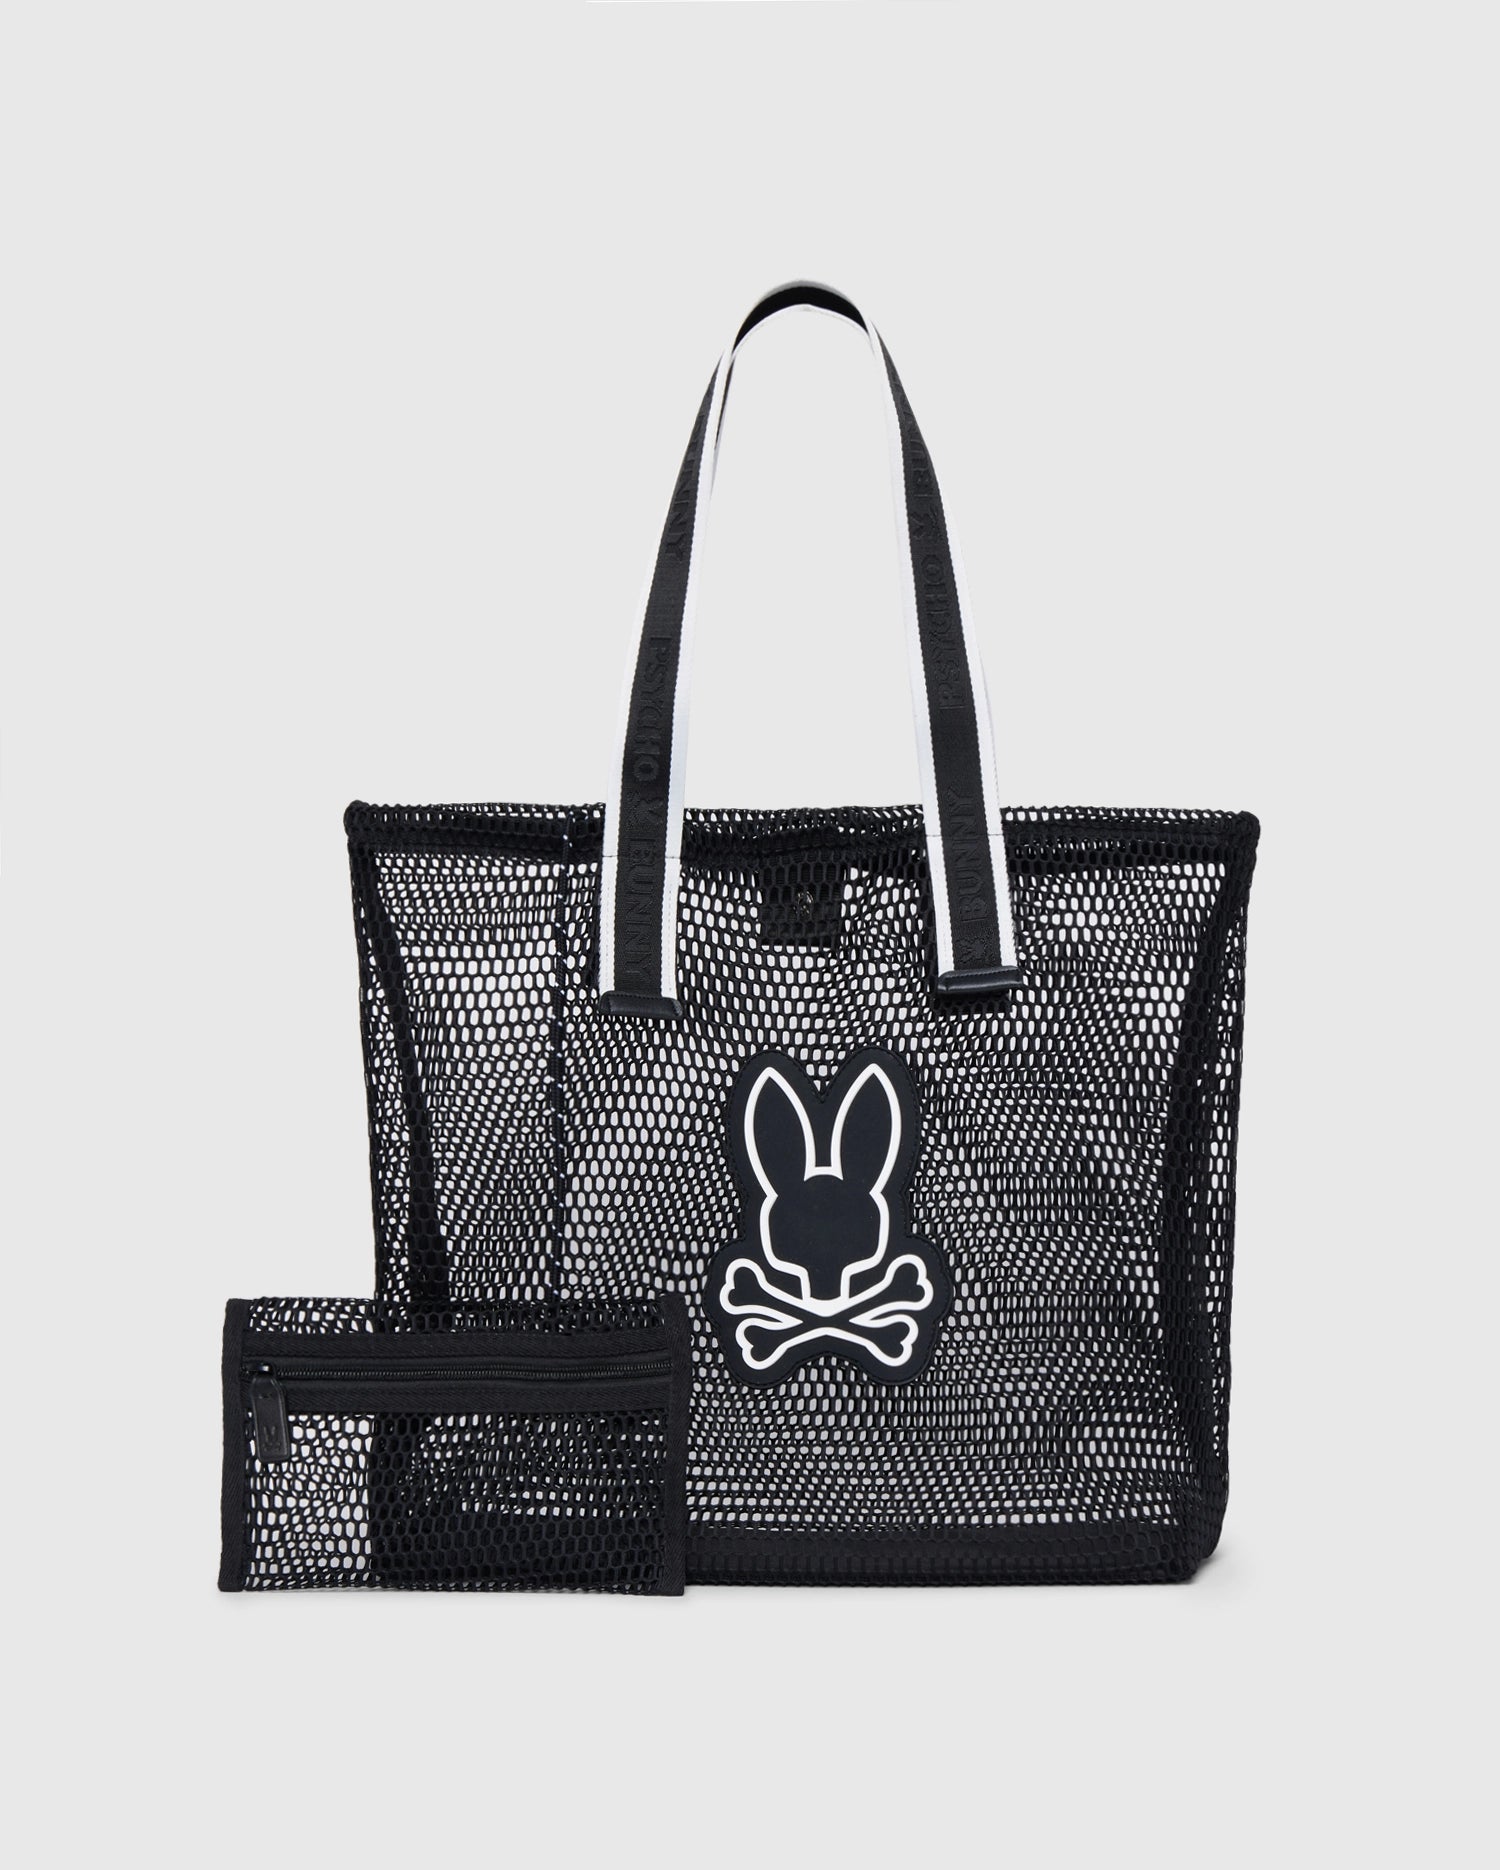 A black Psycho Bunny MENS MESH TOTE BAG - B6A388B200 with two logo-webbing straps featuring a white outline and a white emblem of a bunny head with crossbones below it on the front. Next to the mesh tote is a matching black detachable zip pouch. The background is plain white.